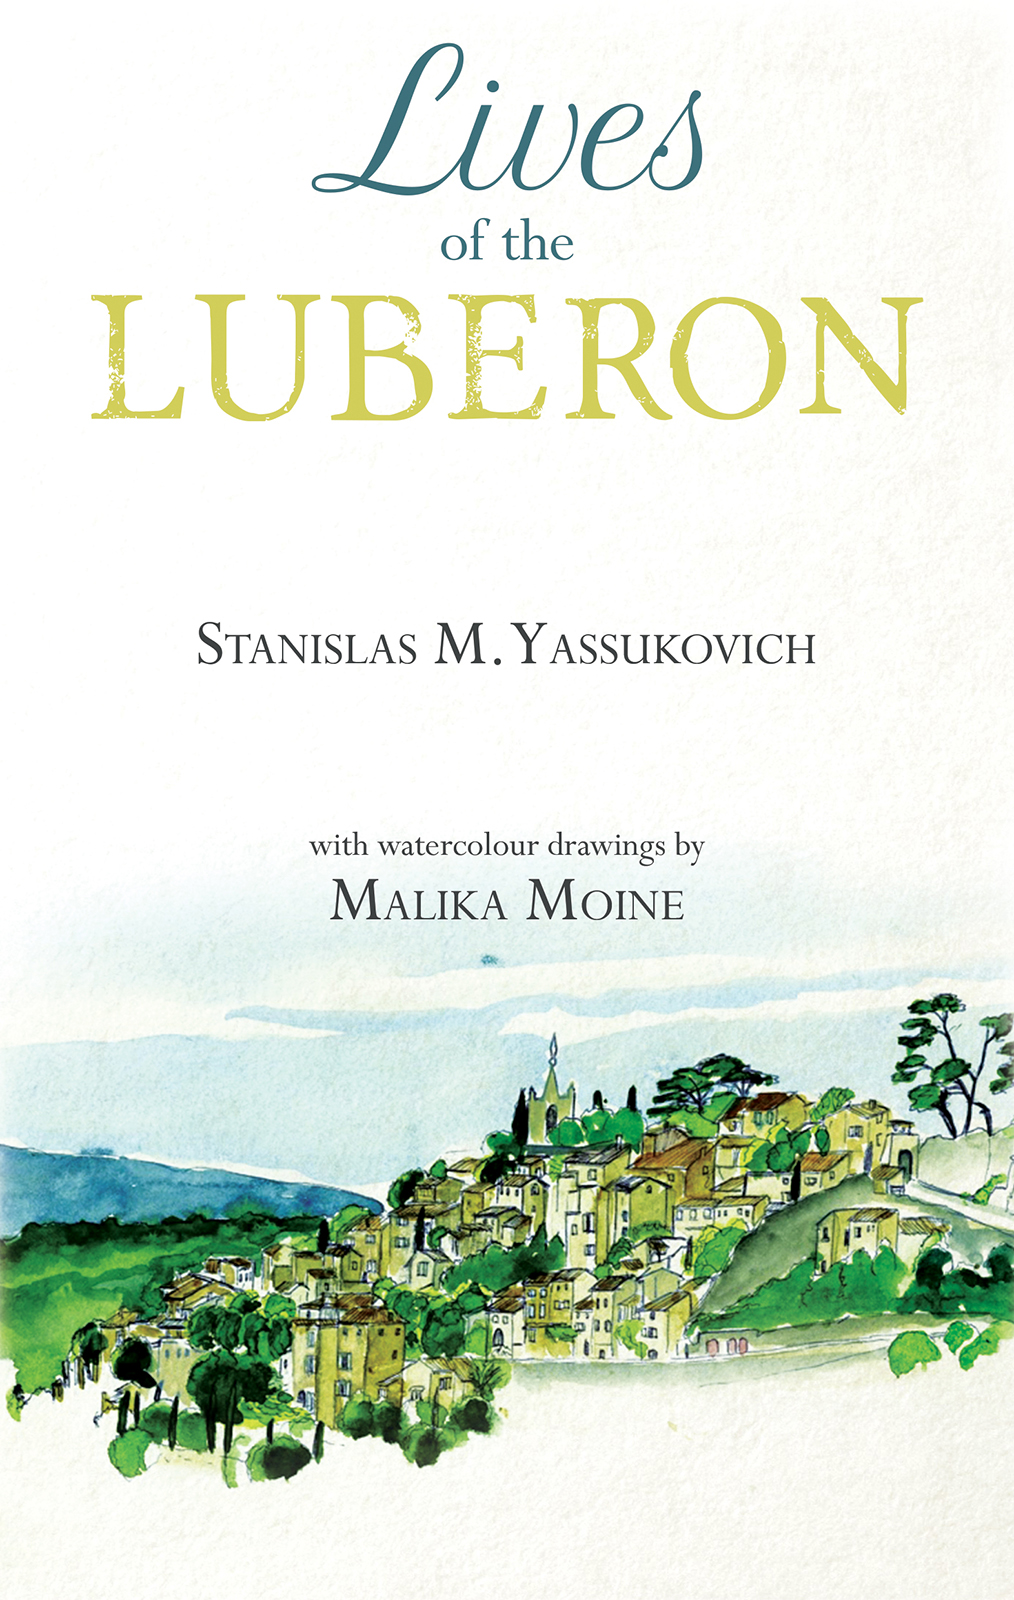 This image is the cover for the book Lives of the Luberon